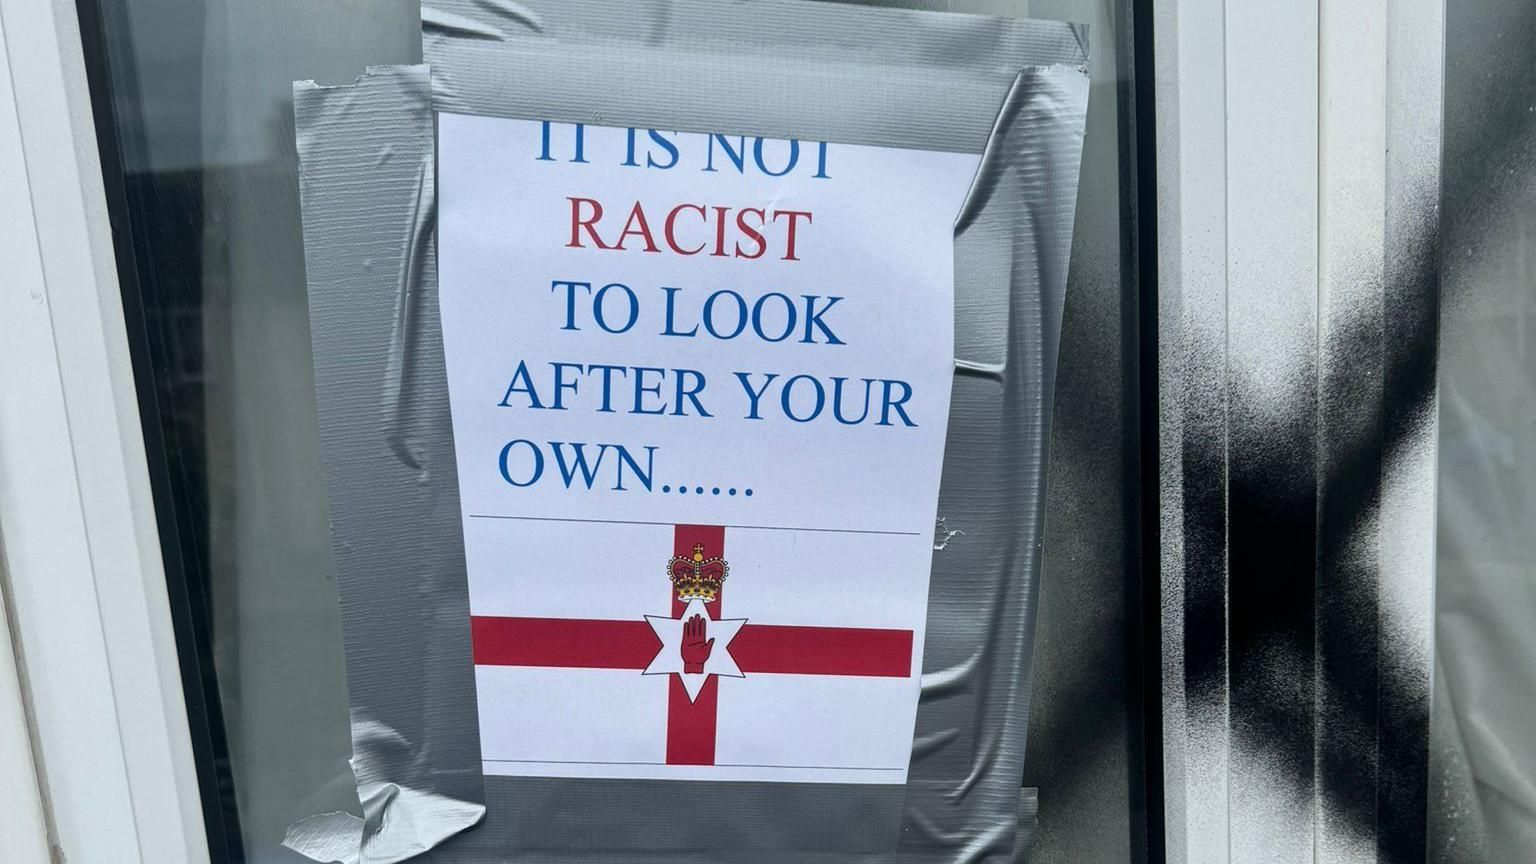 A sign taped to the window read: "It is not racist to look after your own..."